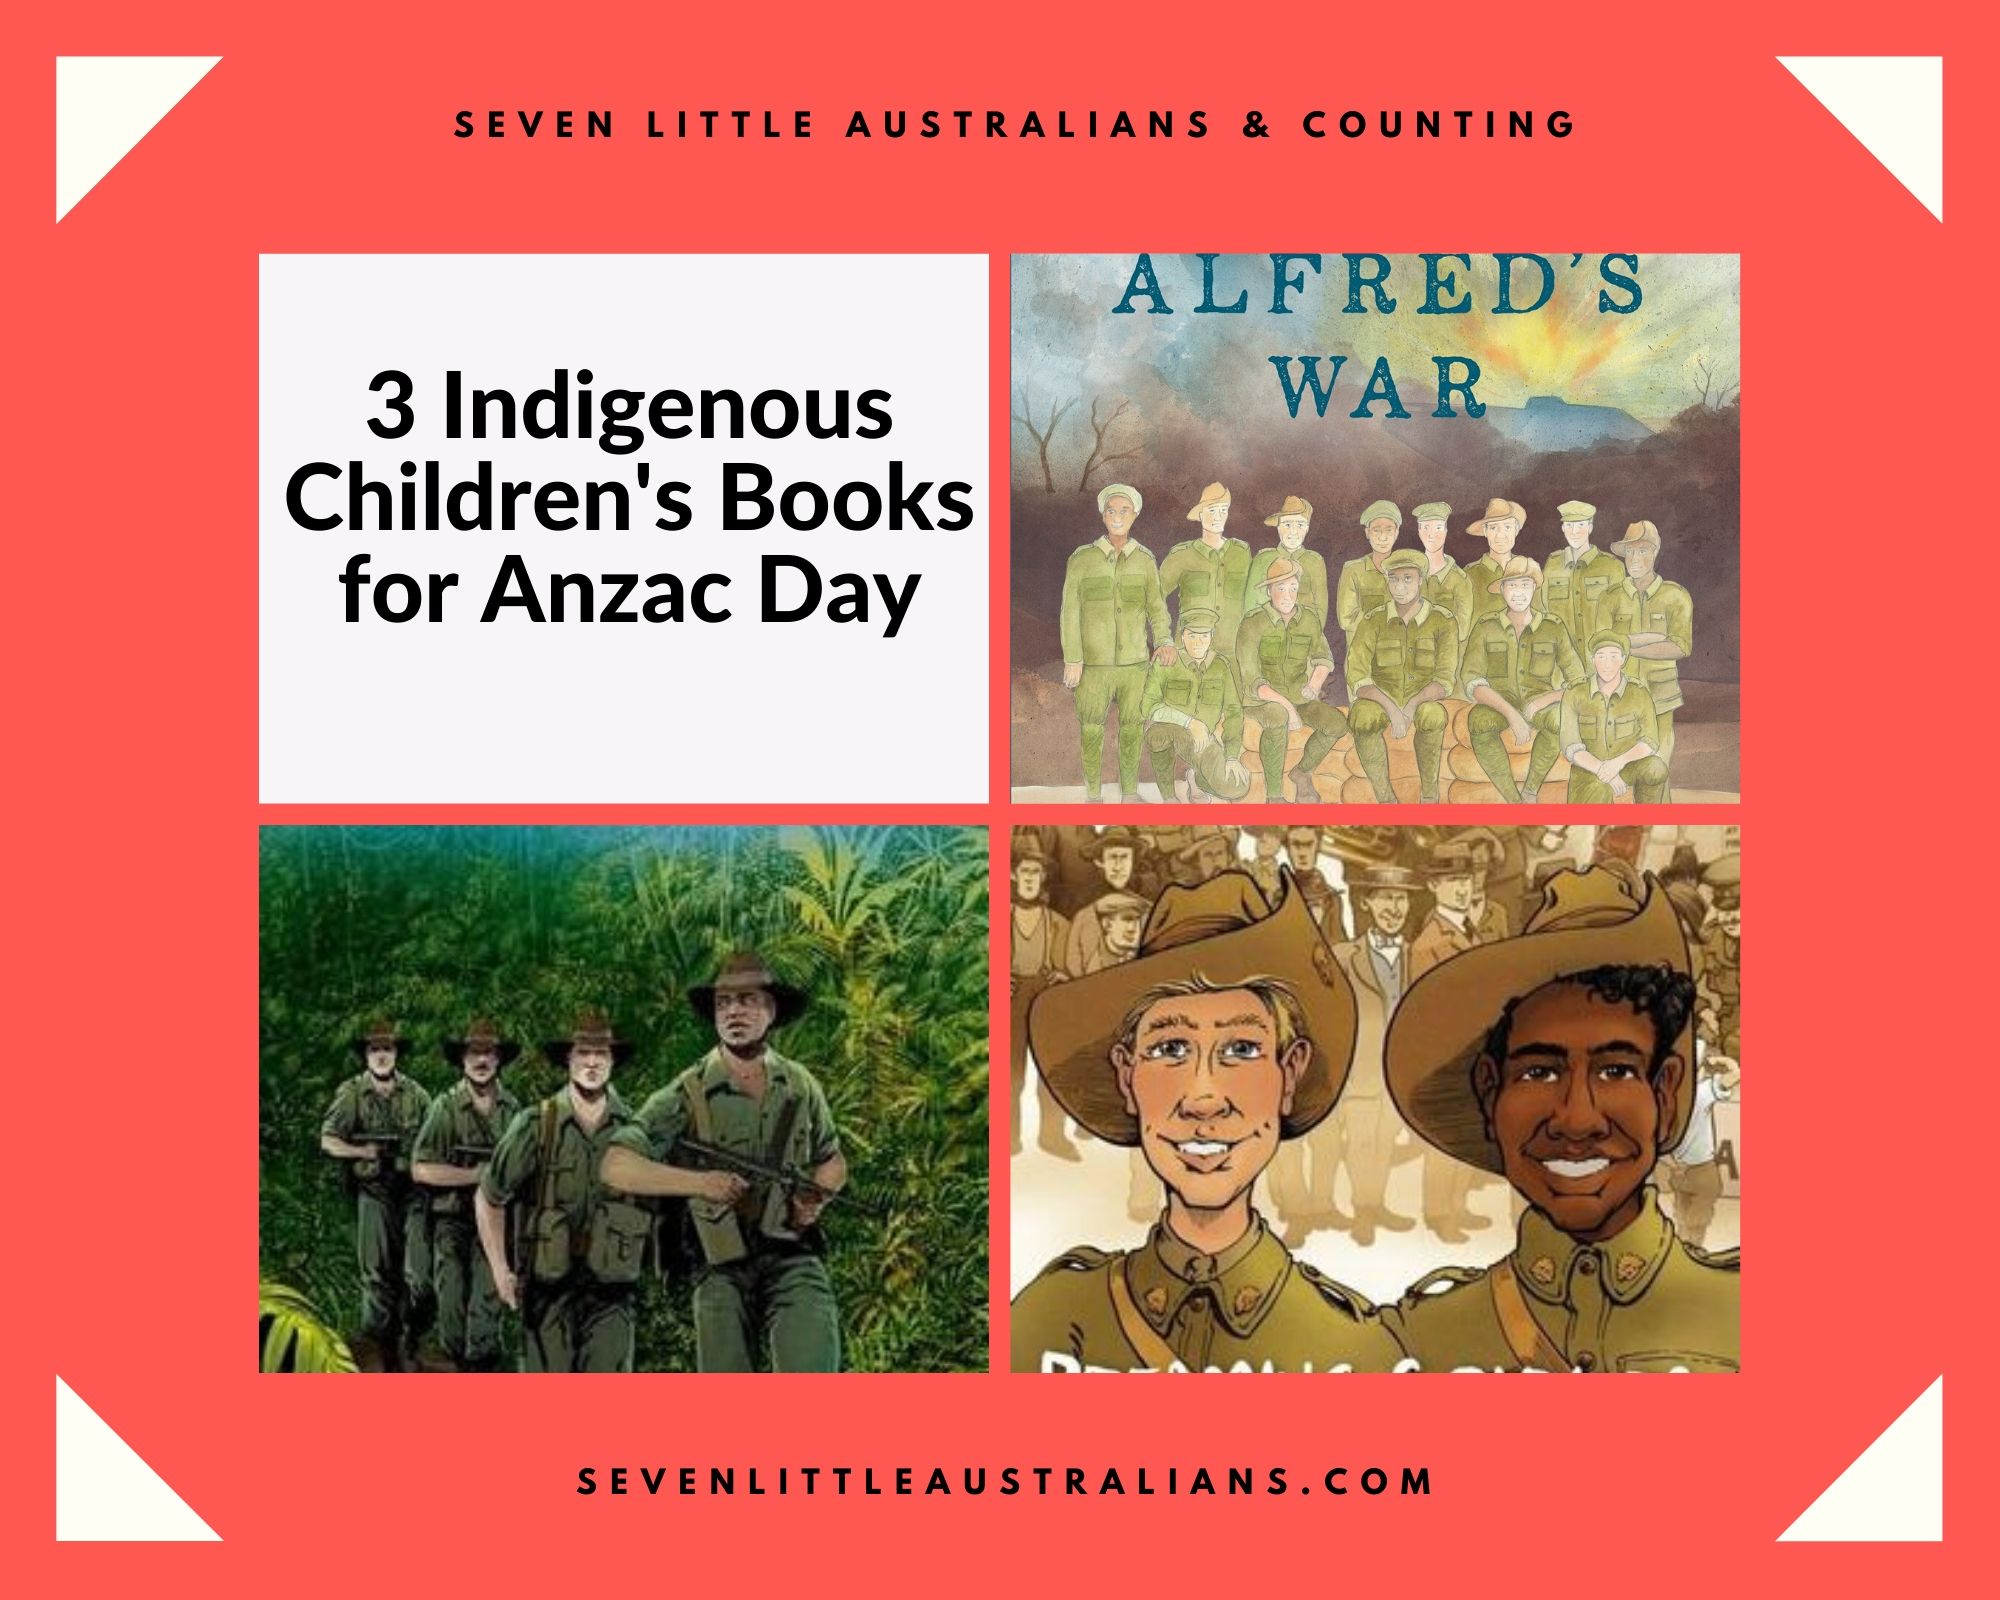 3 Indigenous Children's Books for Anzac Day